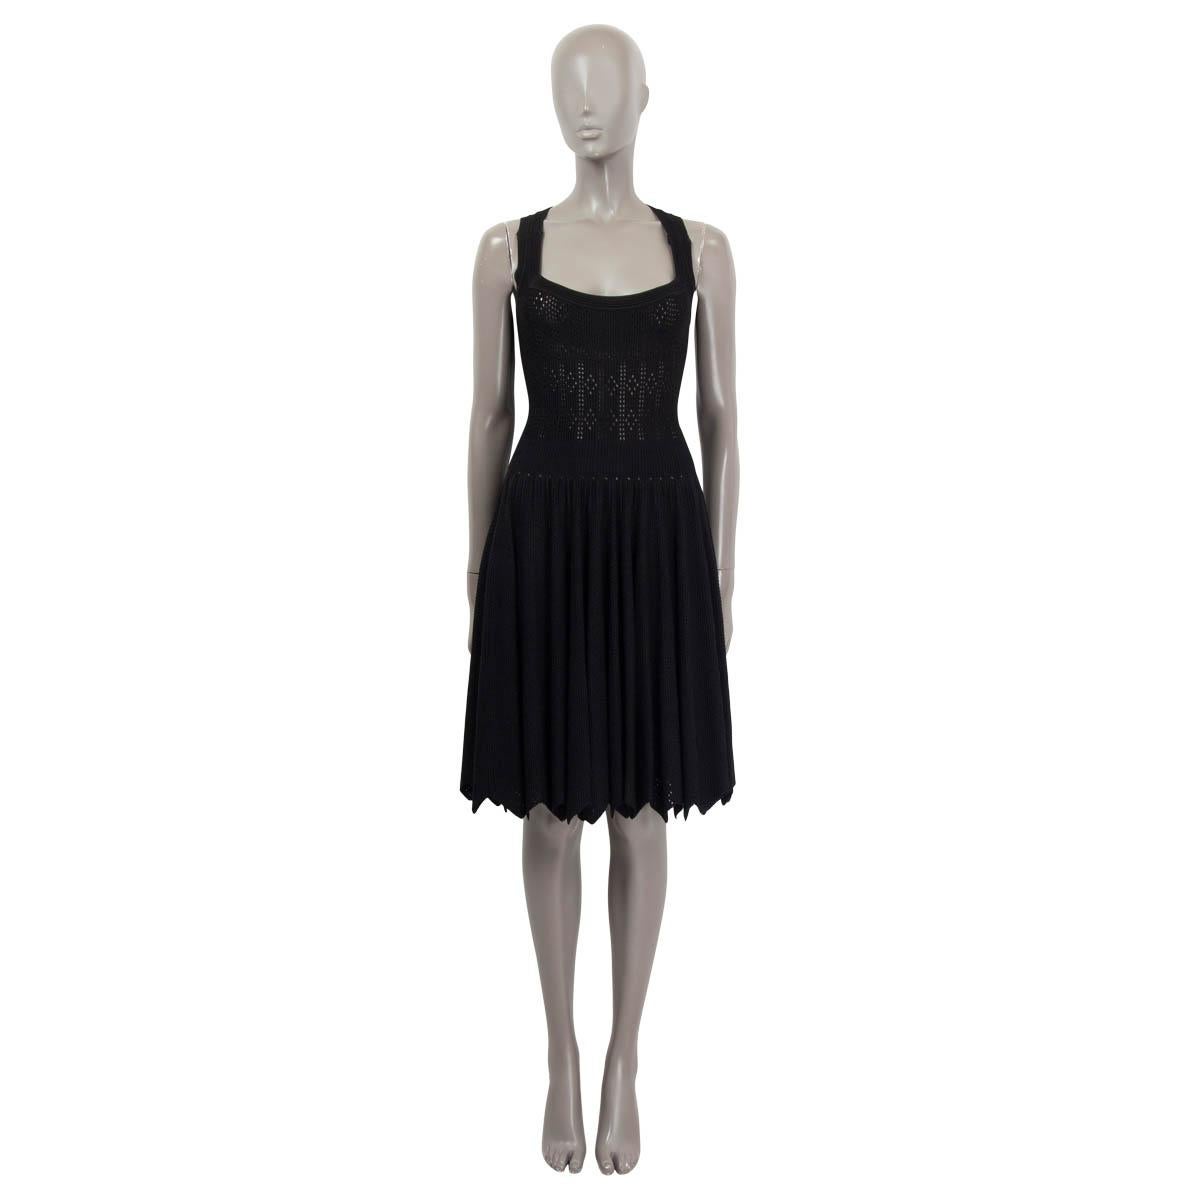 100% authentic Alaïa sleeveless flared dress in black viscose (85%), polyester (10%) and polyamide (5%). Features square neckline and scalloped hem. Opens with a zipper on the back. Has been worn and is in excellent condition. 

Measurements
Tag